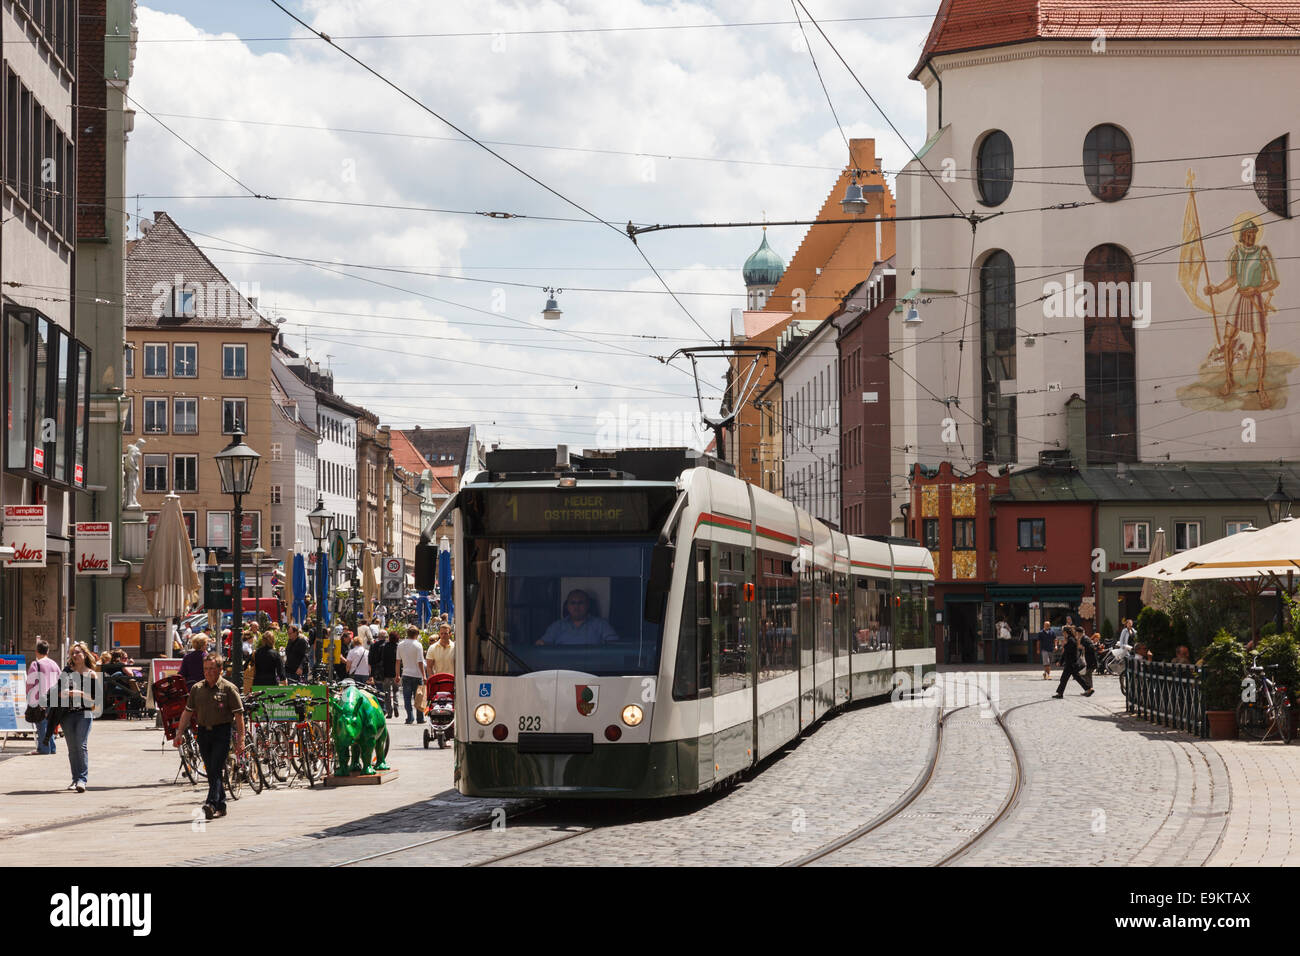 Tram on busy cobbled street in city centre by Moritzkirke church in Maximilianstrasse, Augsburg, Bavaria, Germany, Europe. Stock Photo